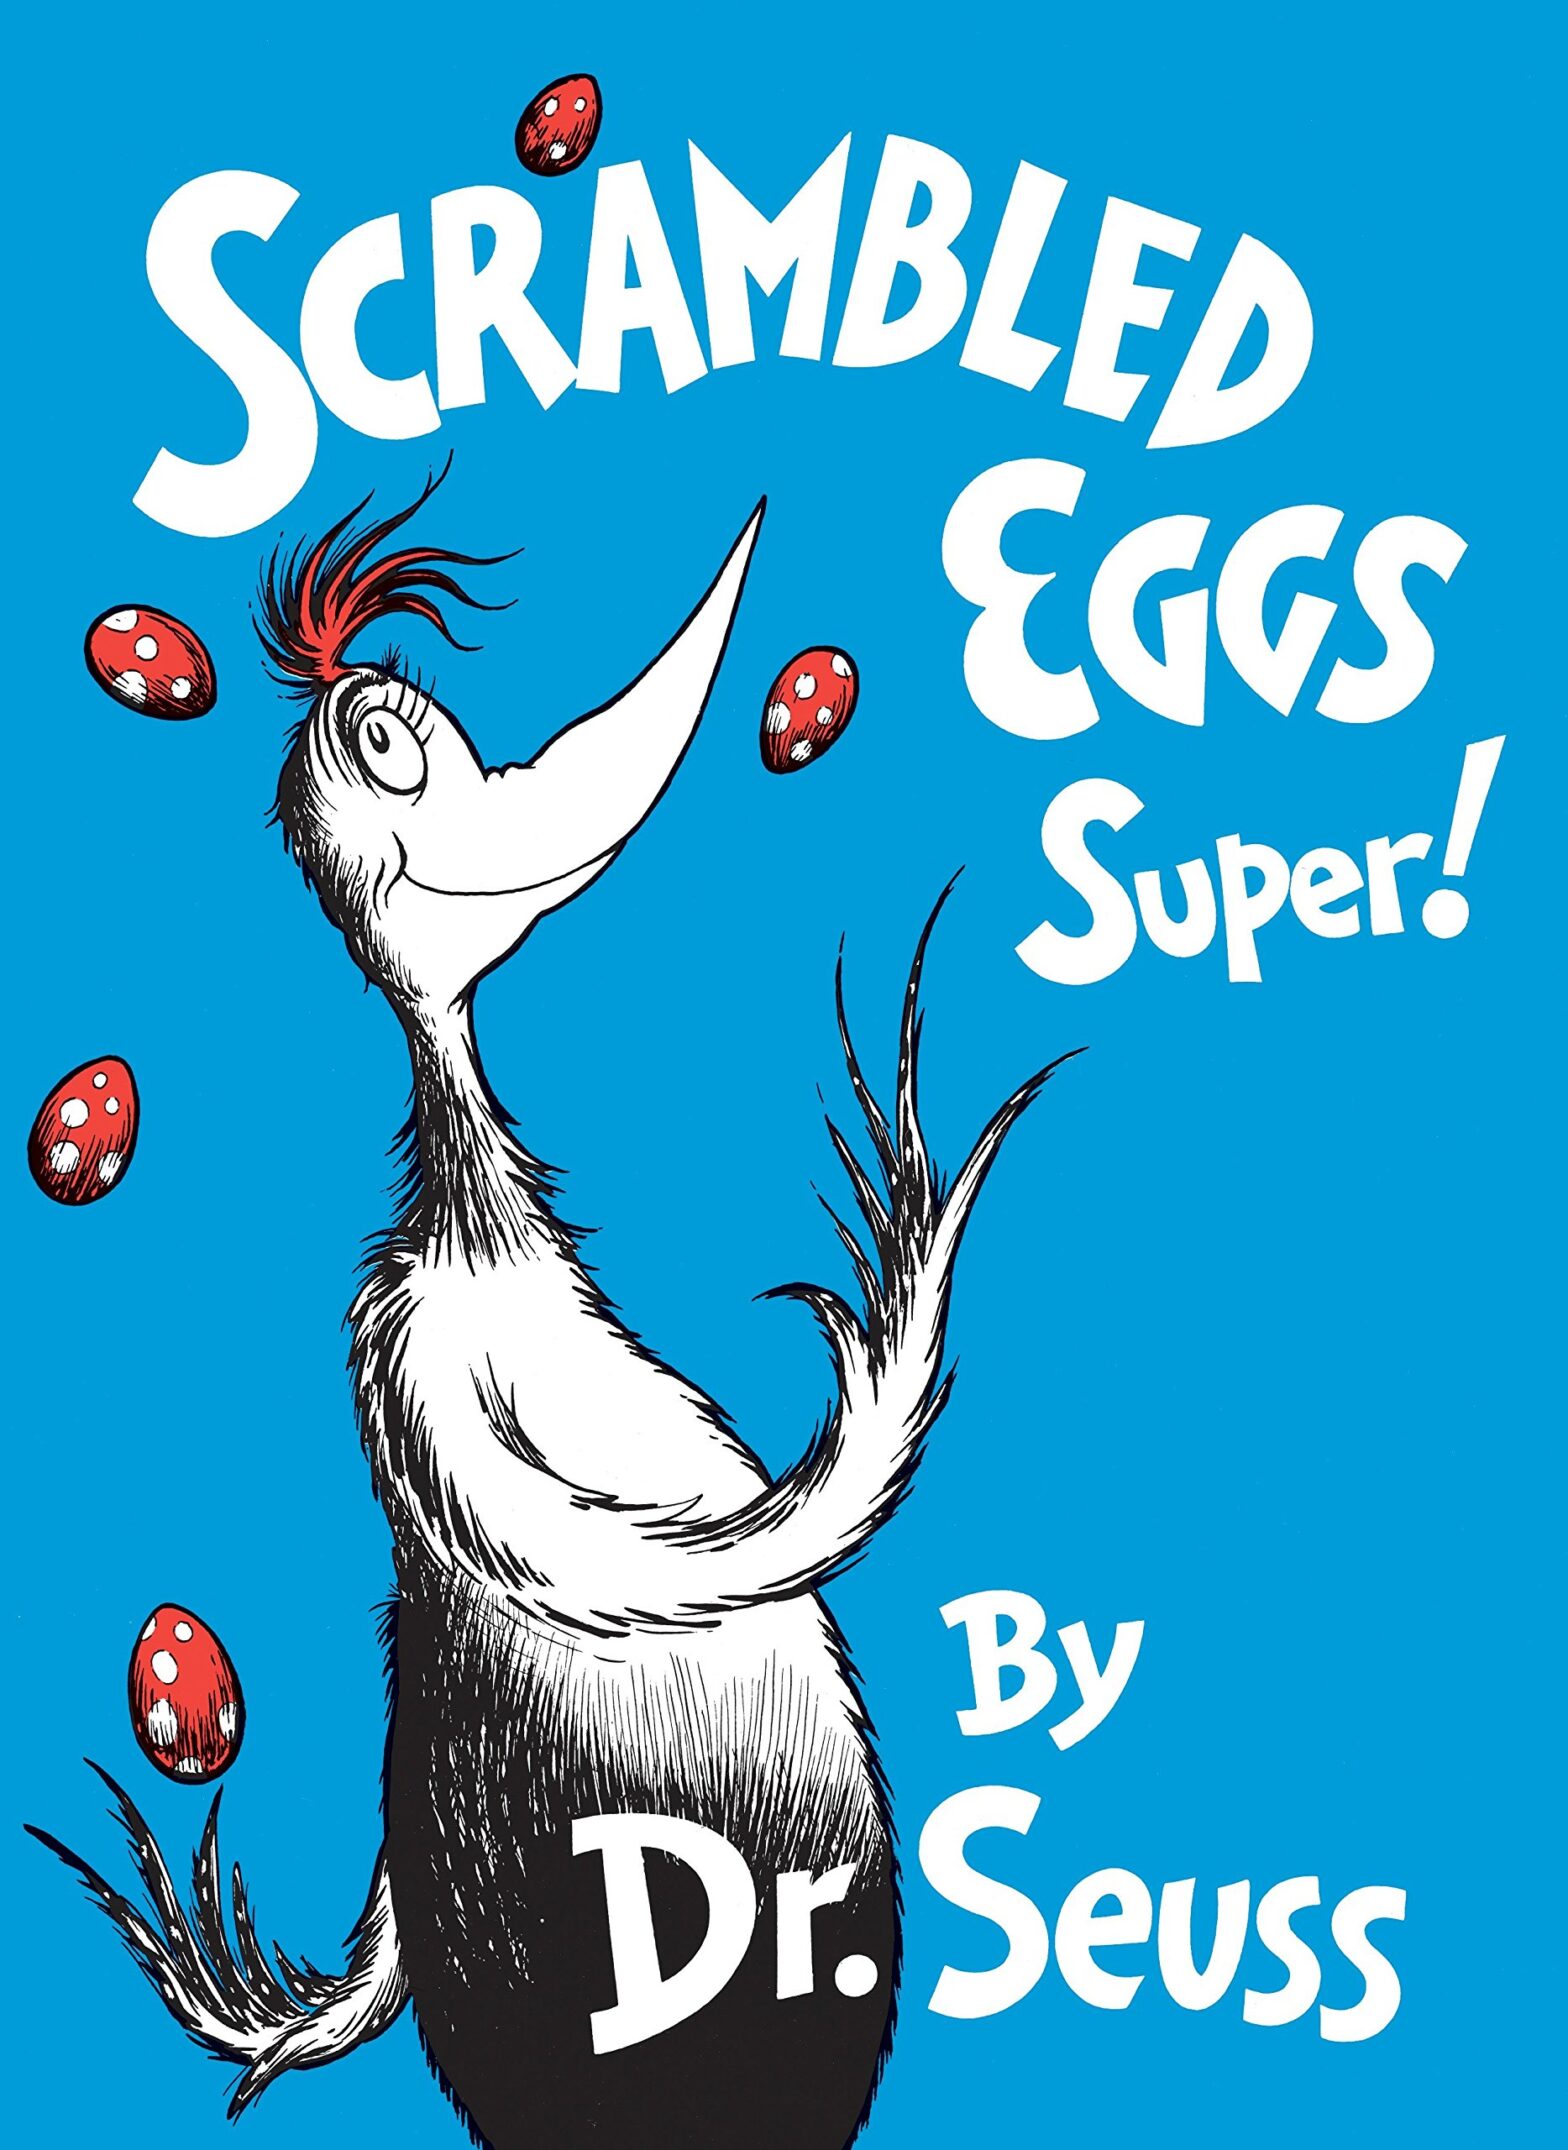 dr-seuss-actually-being-banned-many-books-will-no-longer-be-published